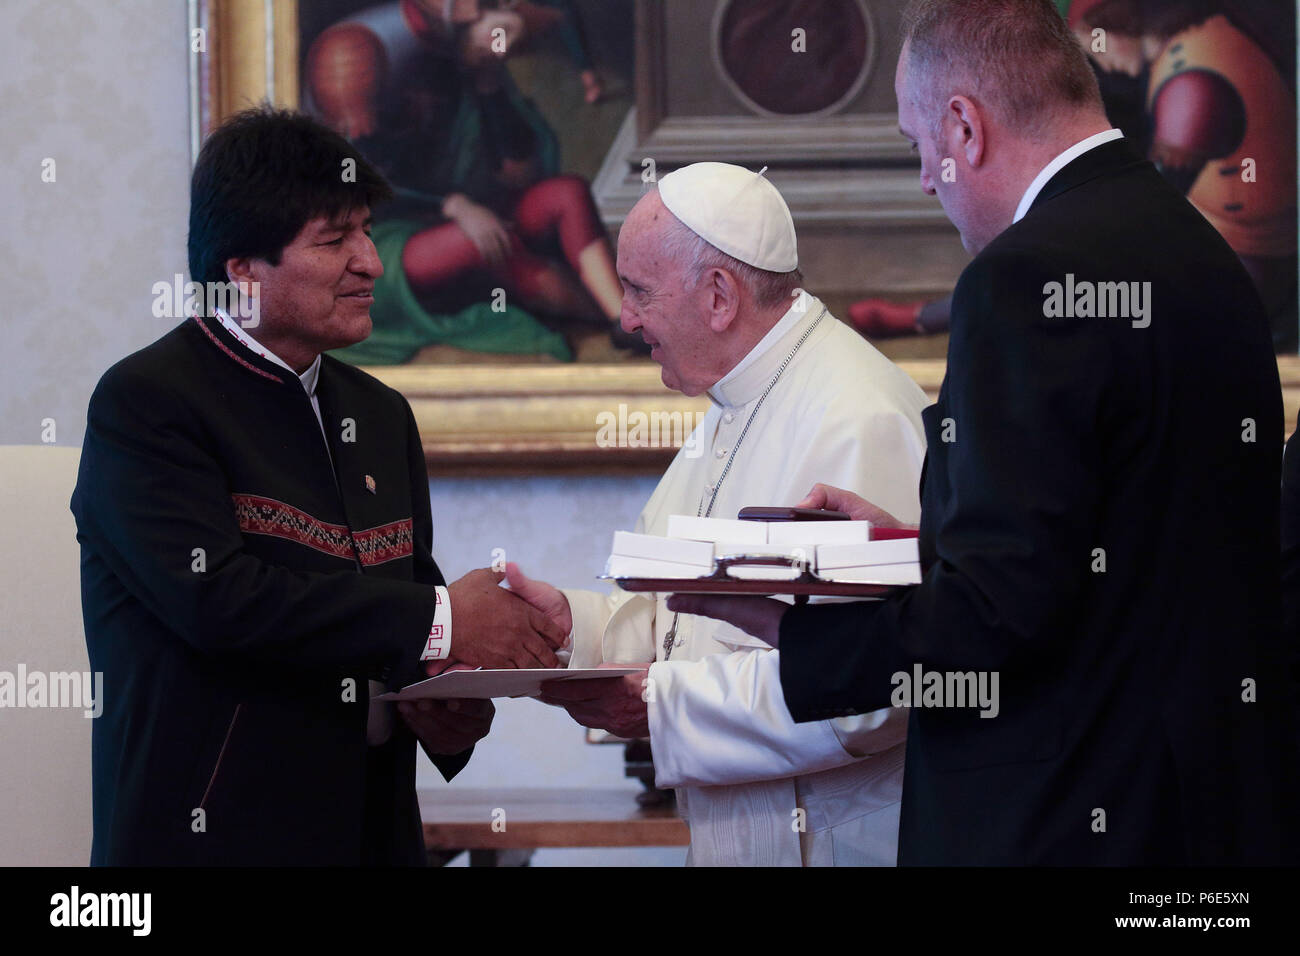 Vatican City, June 30, 2018 - Vatican City (Holy See) POPE FRANCIS meets Bolivian President EVO MORALES AYMA at the Vatican. Credit: Evandro Inetti/ZUMA Wire/Alamy Live News Stock Photo